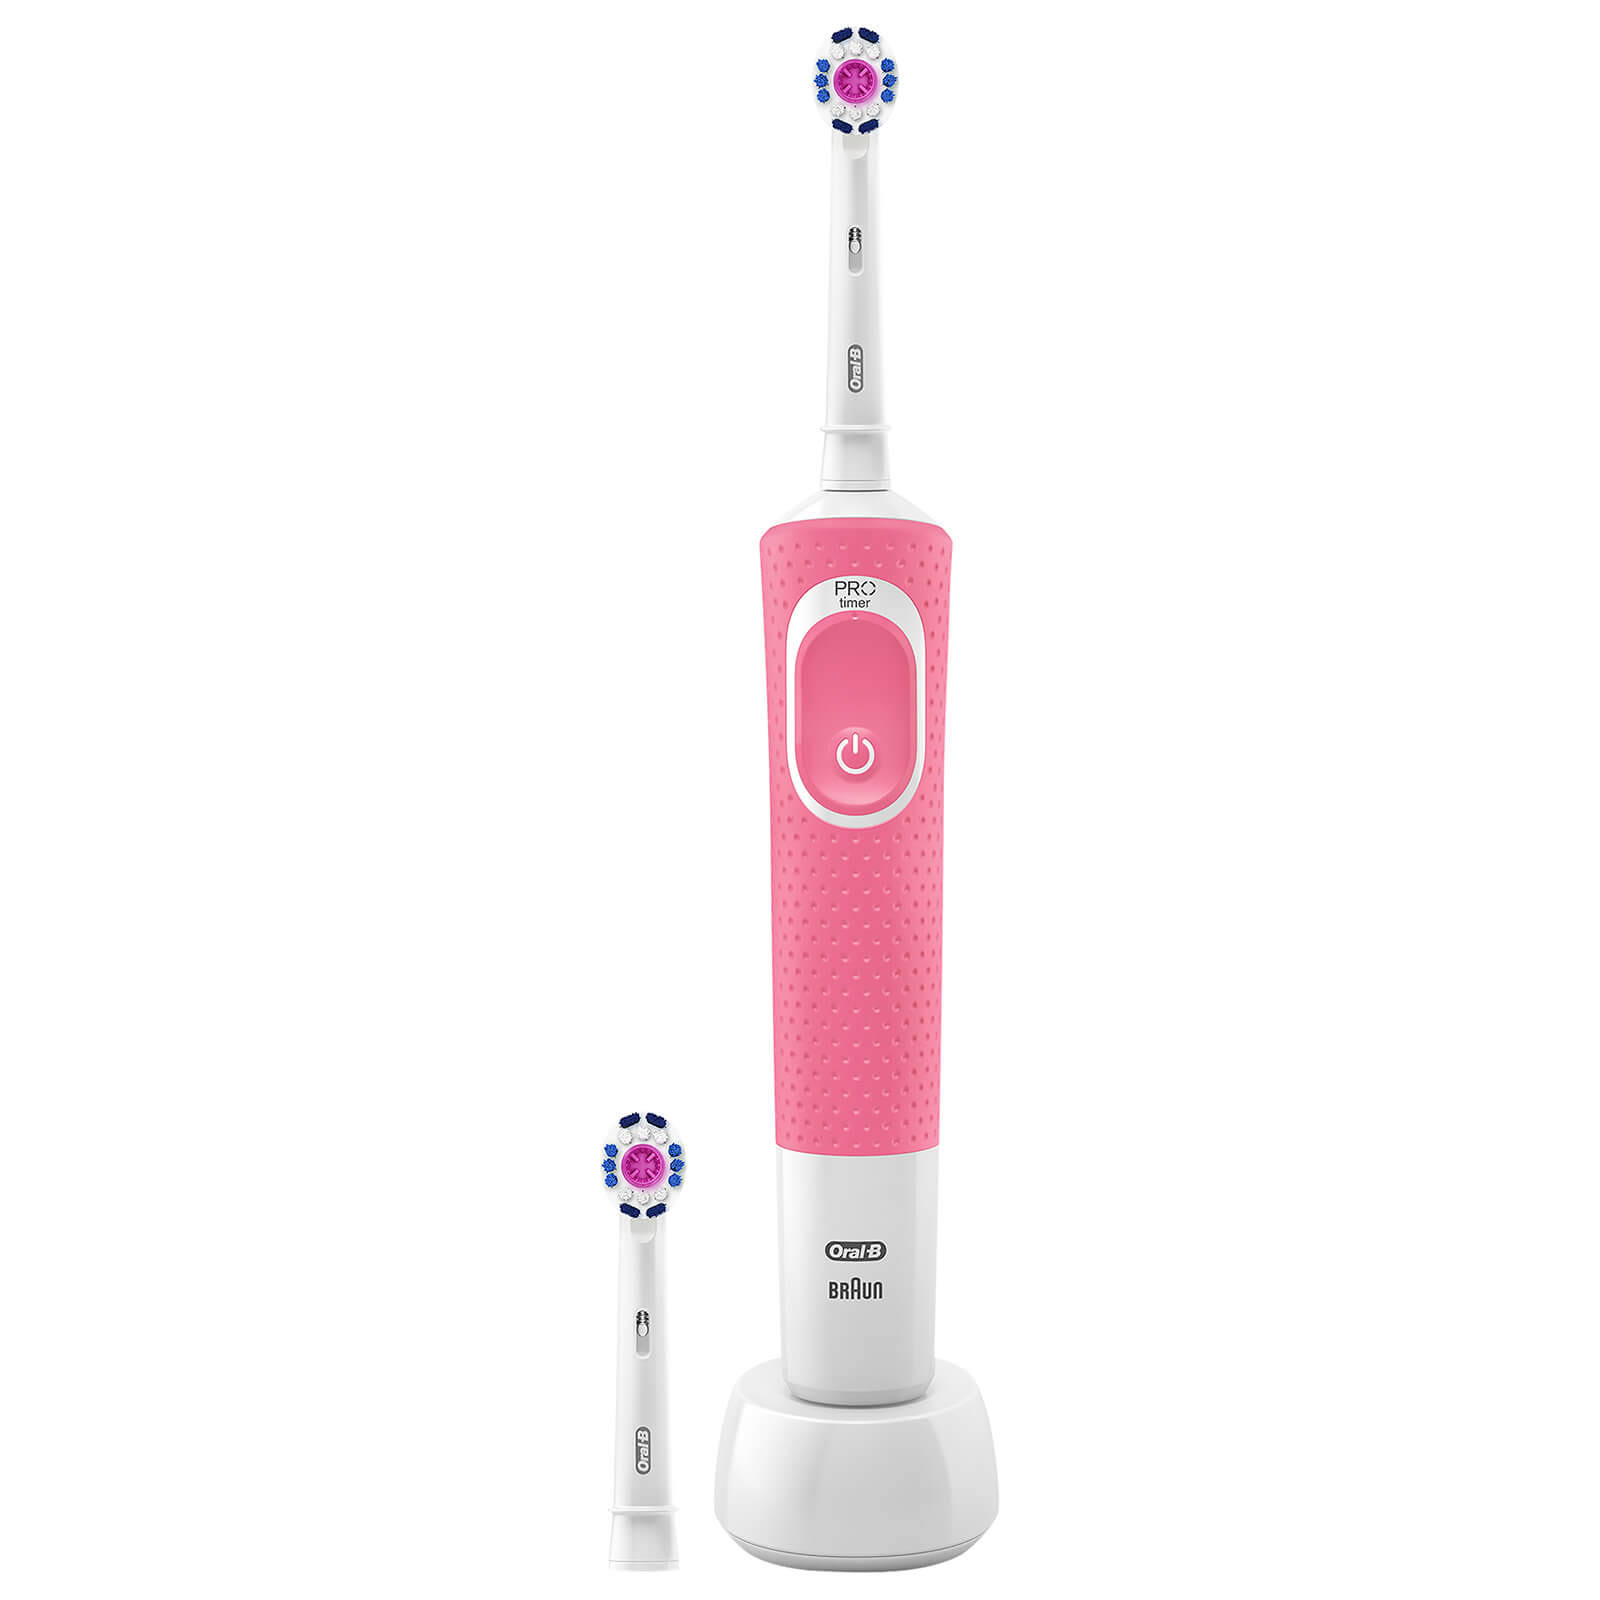 Oral-B Vitality Plus 3D White Pink Electric Toothbrush